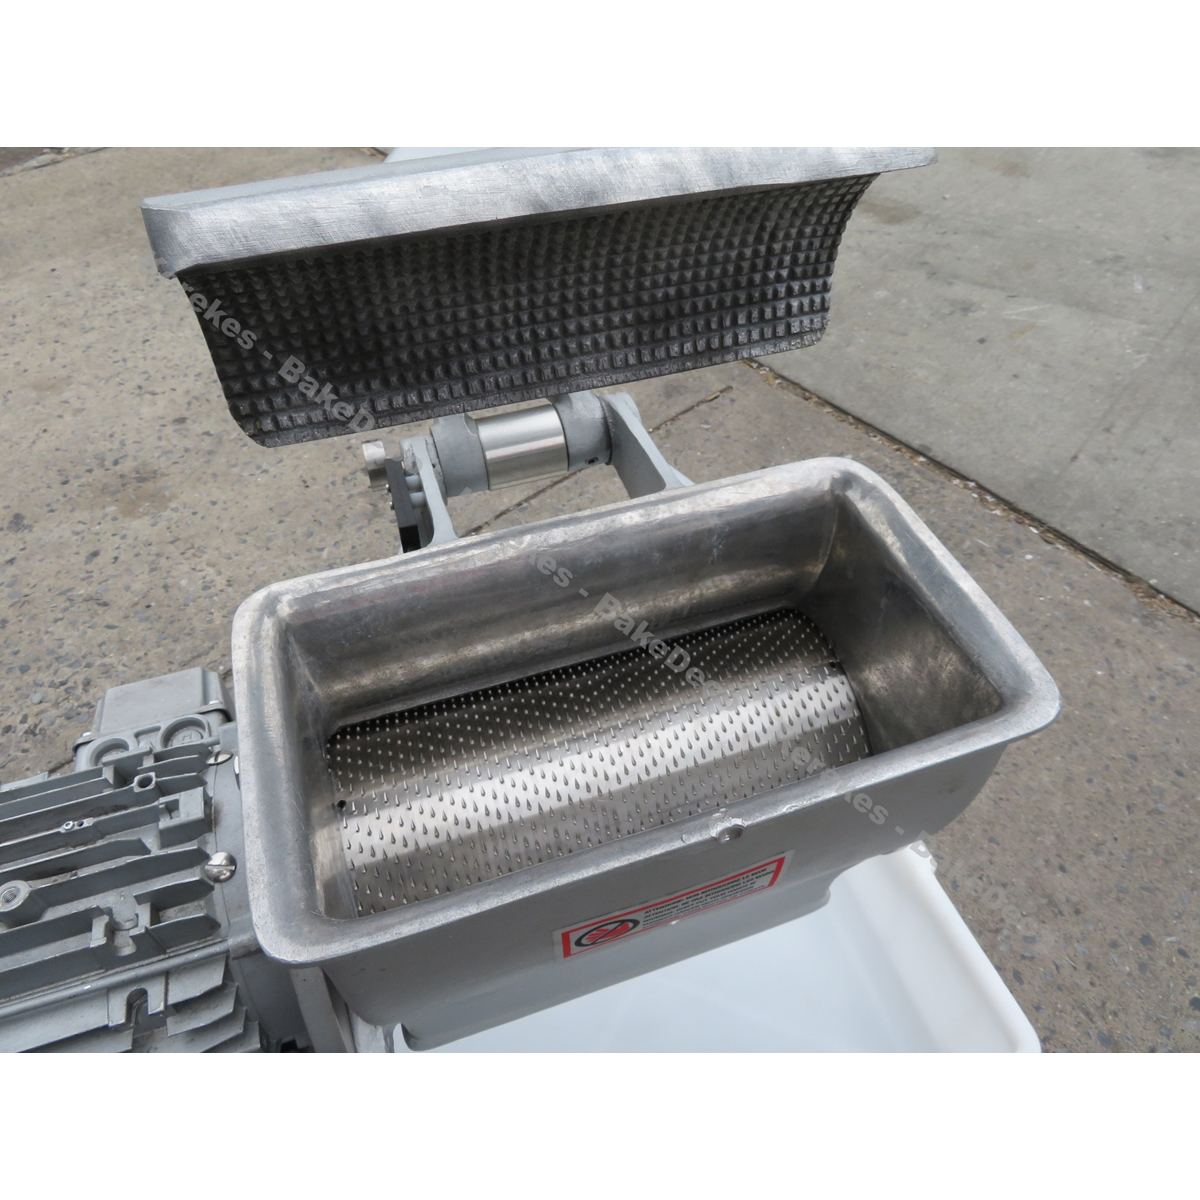 Sirman GFHP4 4HP Cheese Grater/ Bread Crumber, Used Great Condition image 2